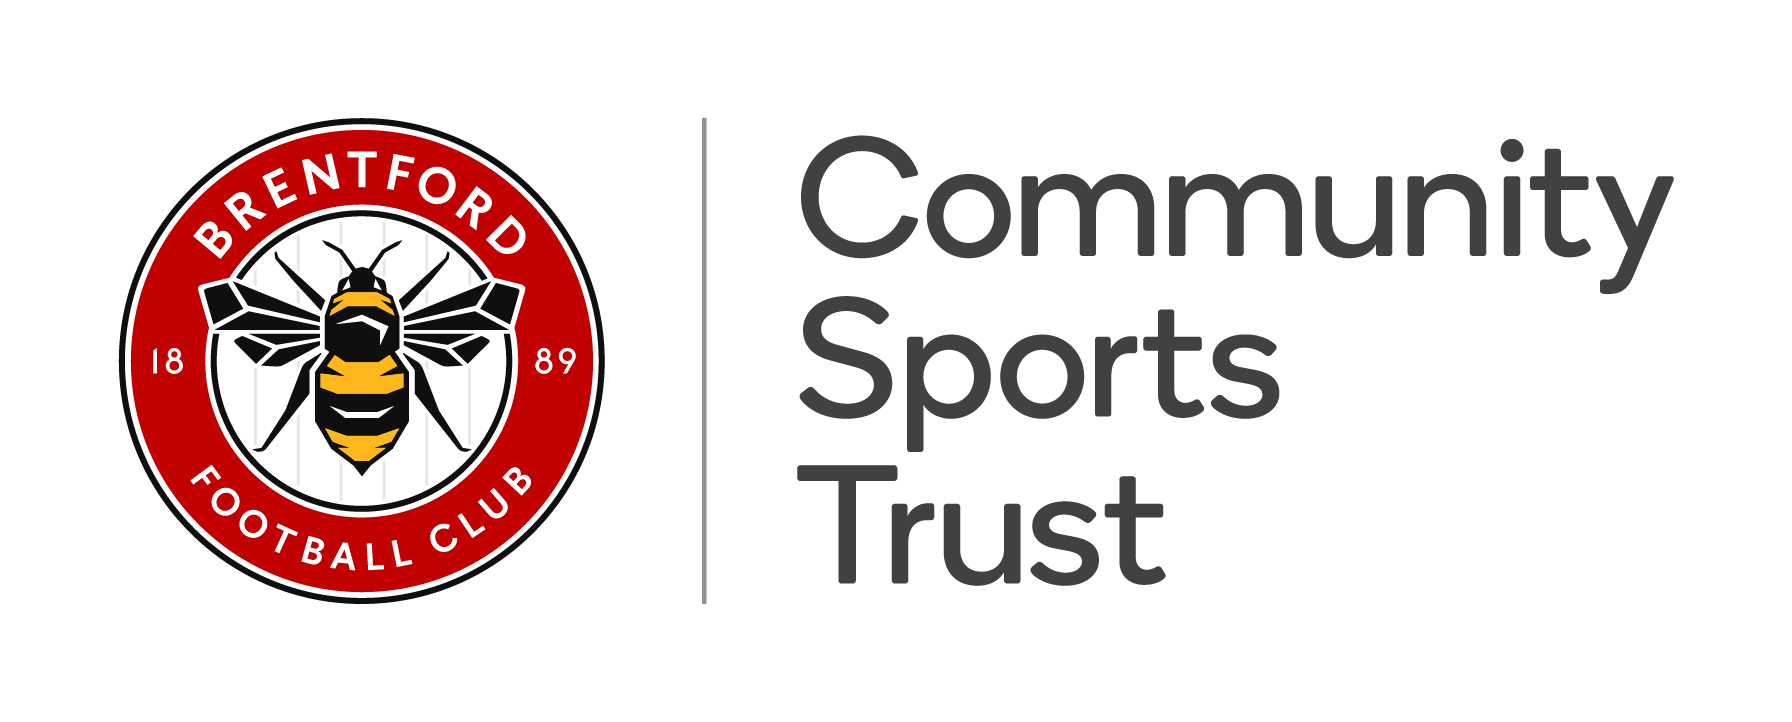 With community work spanning more than three decades, Brentford FC Community Sports Trust has established itself as a pioneering organisation for the local community